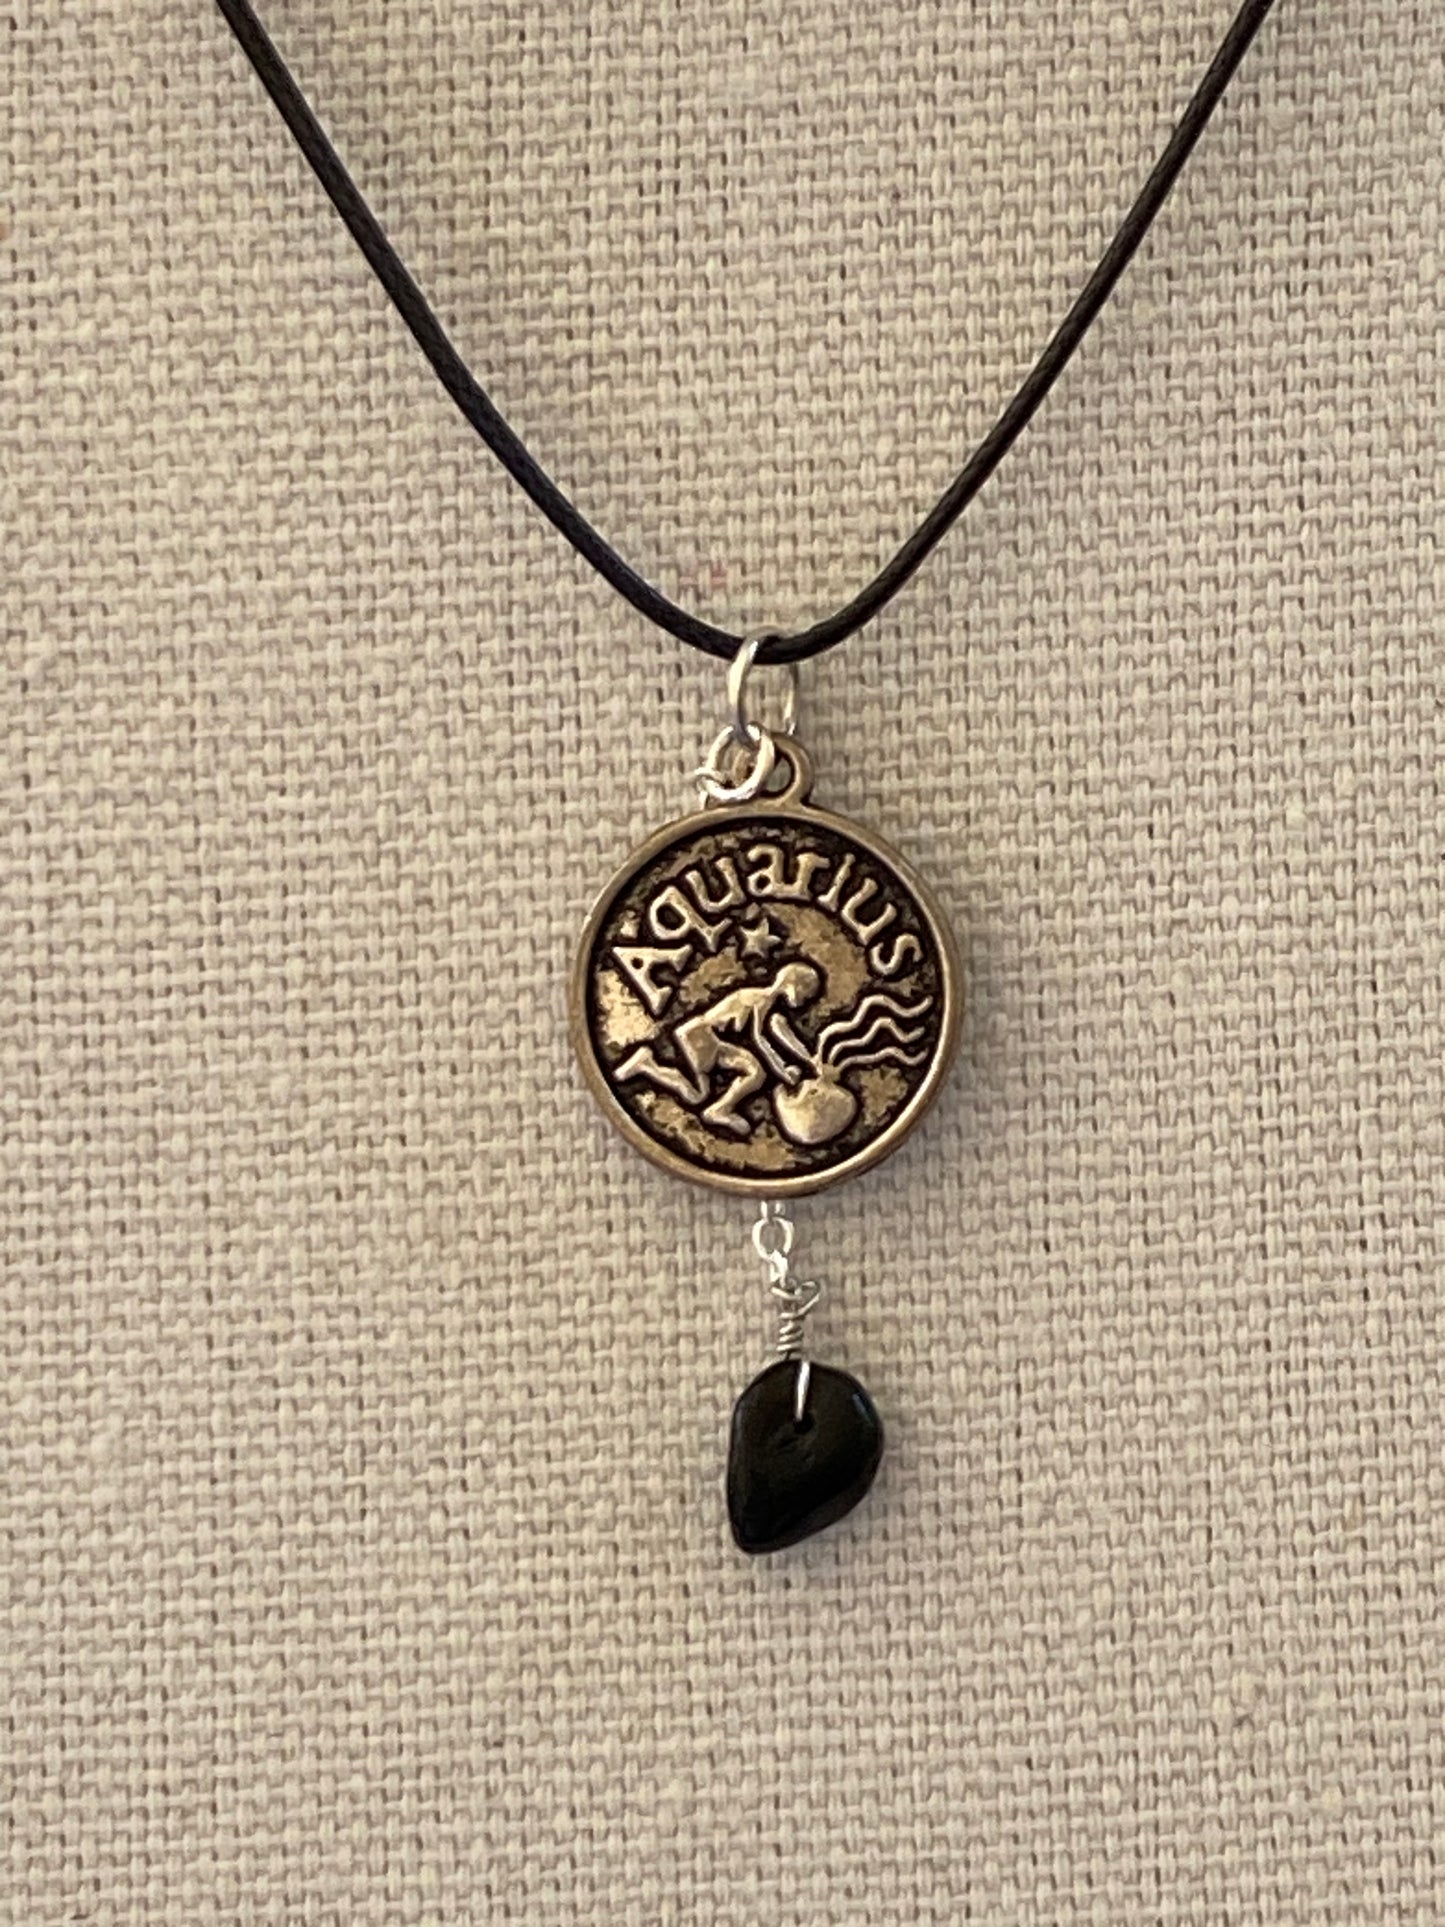 Necklace zodiac charm and hanging rock